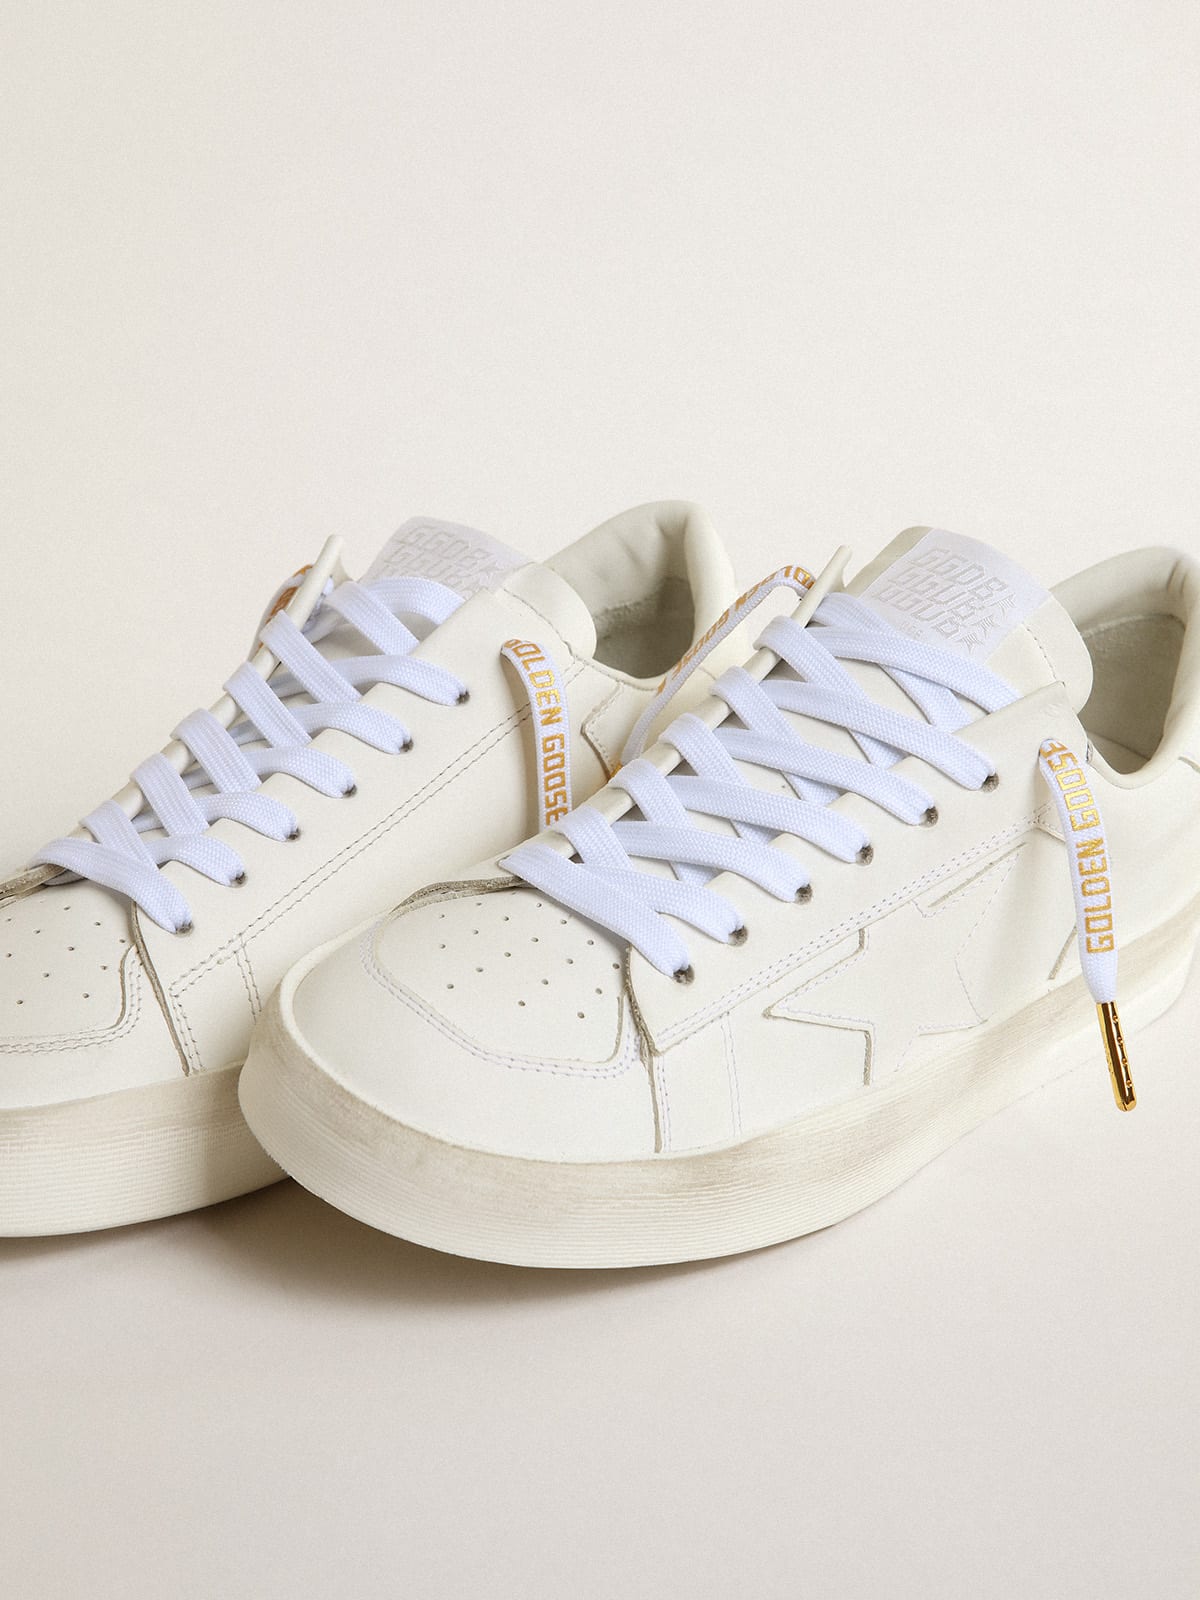 Golden Goose - White cotton laces with contrasting gold-colored logo in 